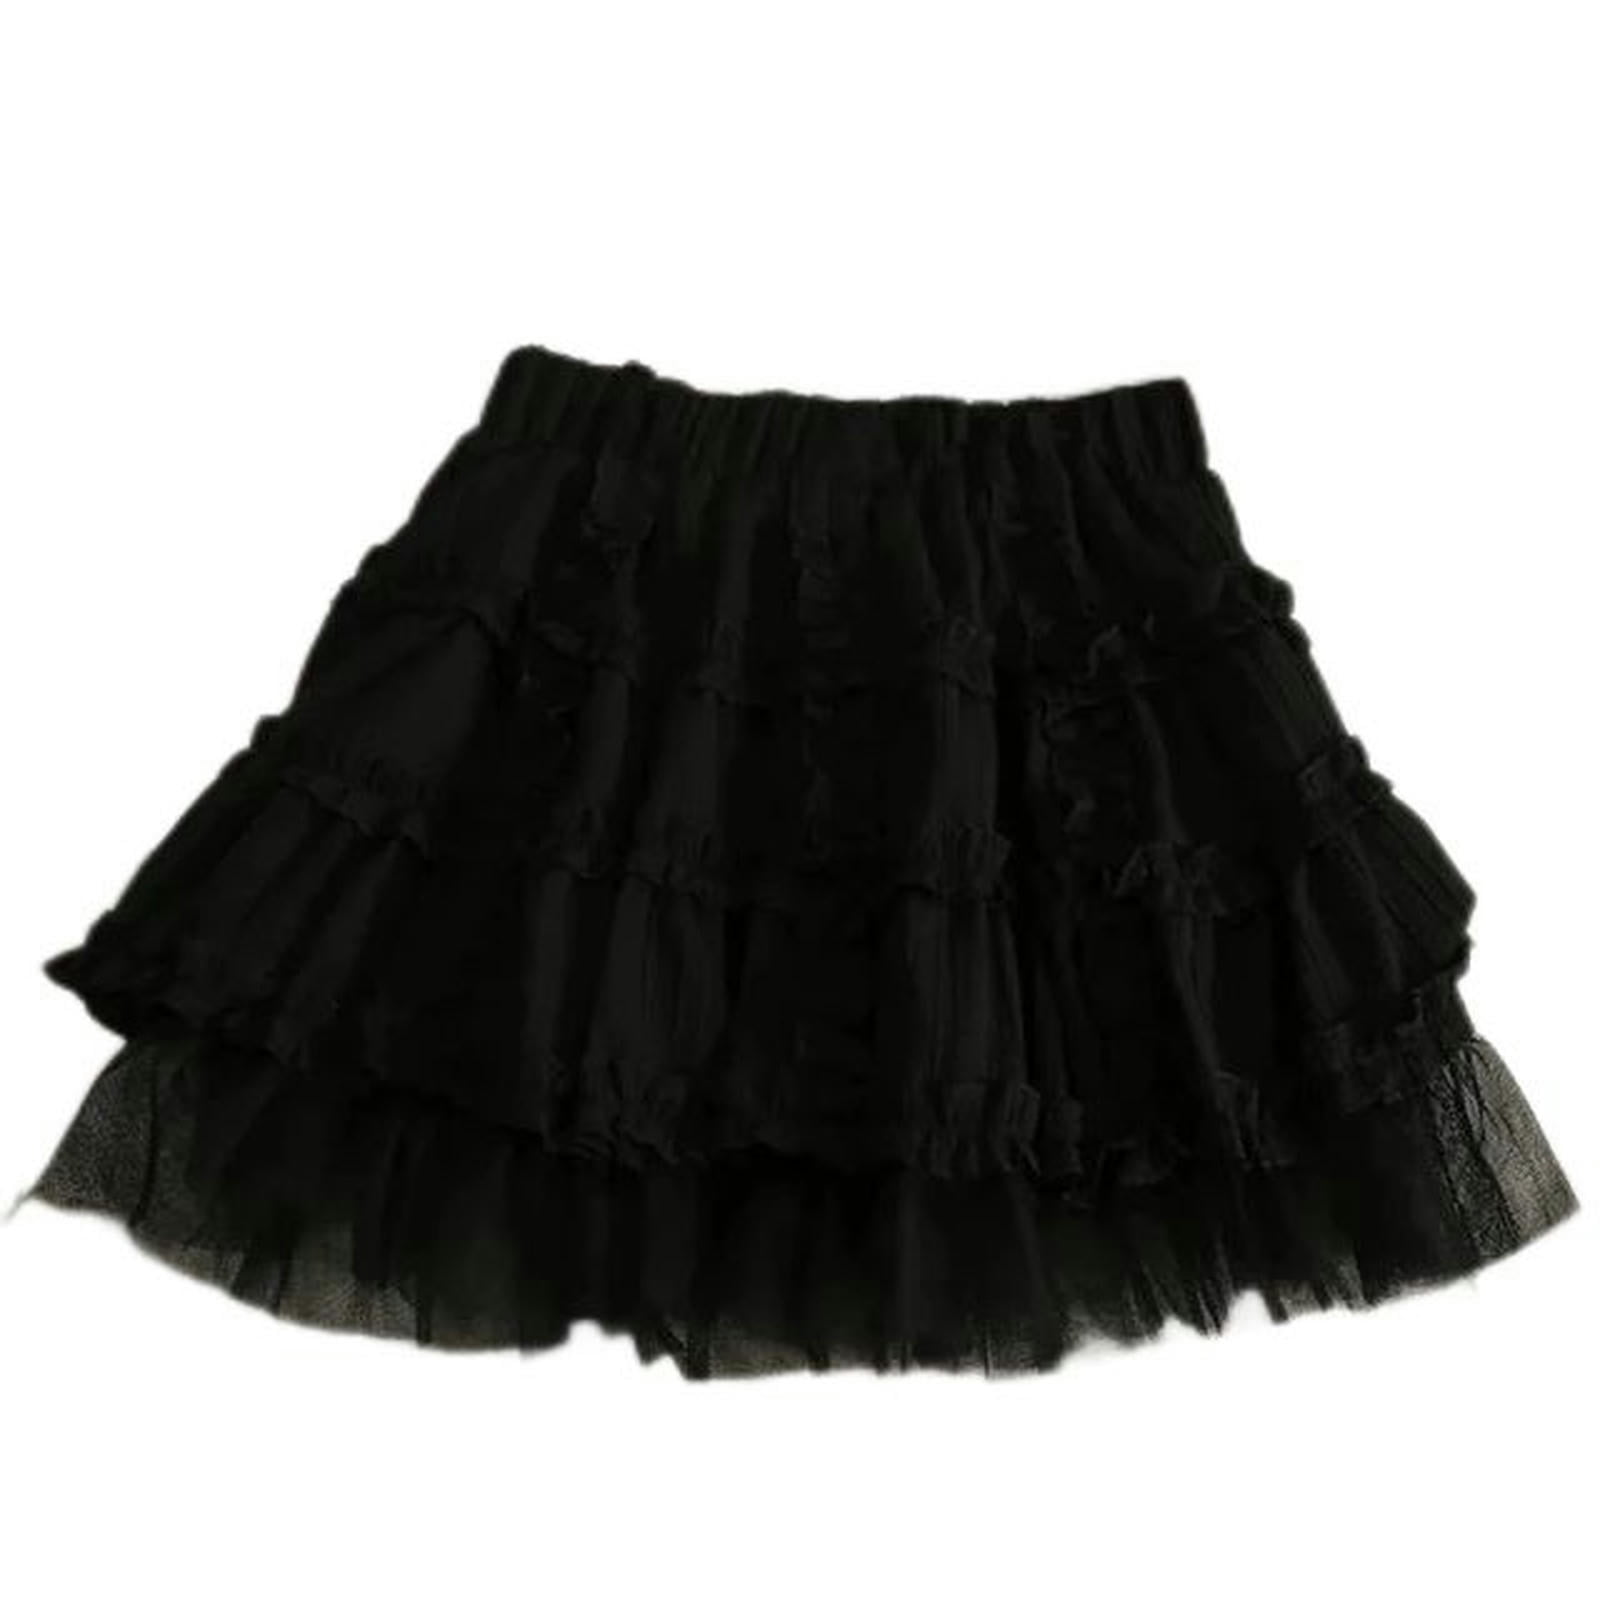 White Pleated Lace Cake Skirt Women A-line Skirt Sweet Gentle Cute ...